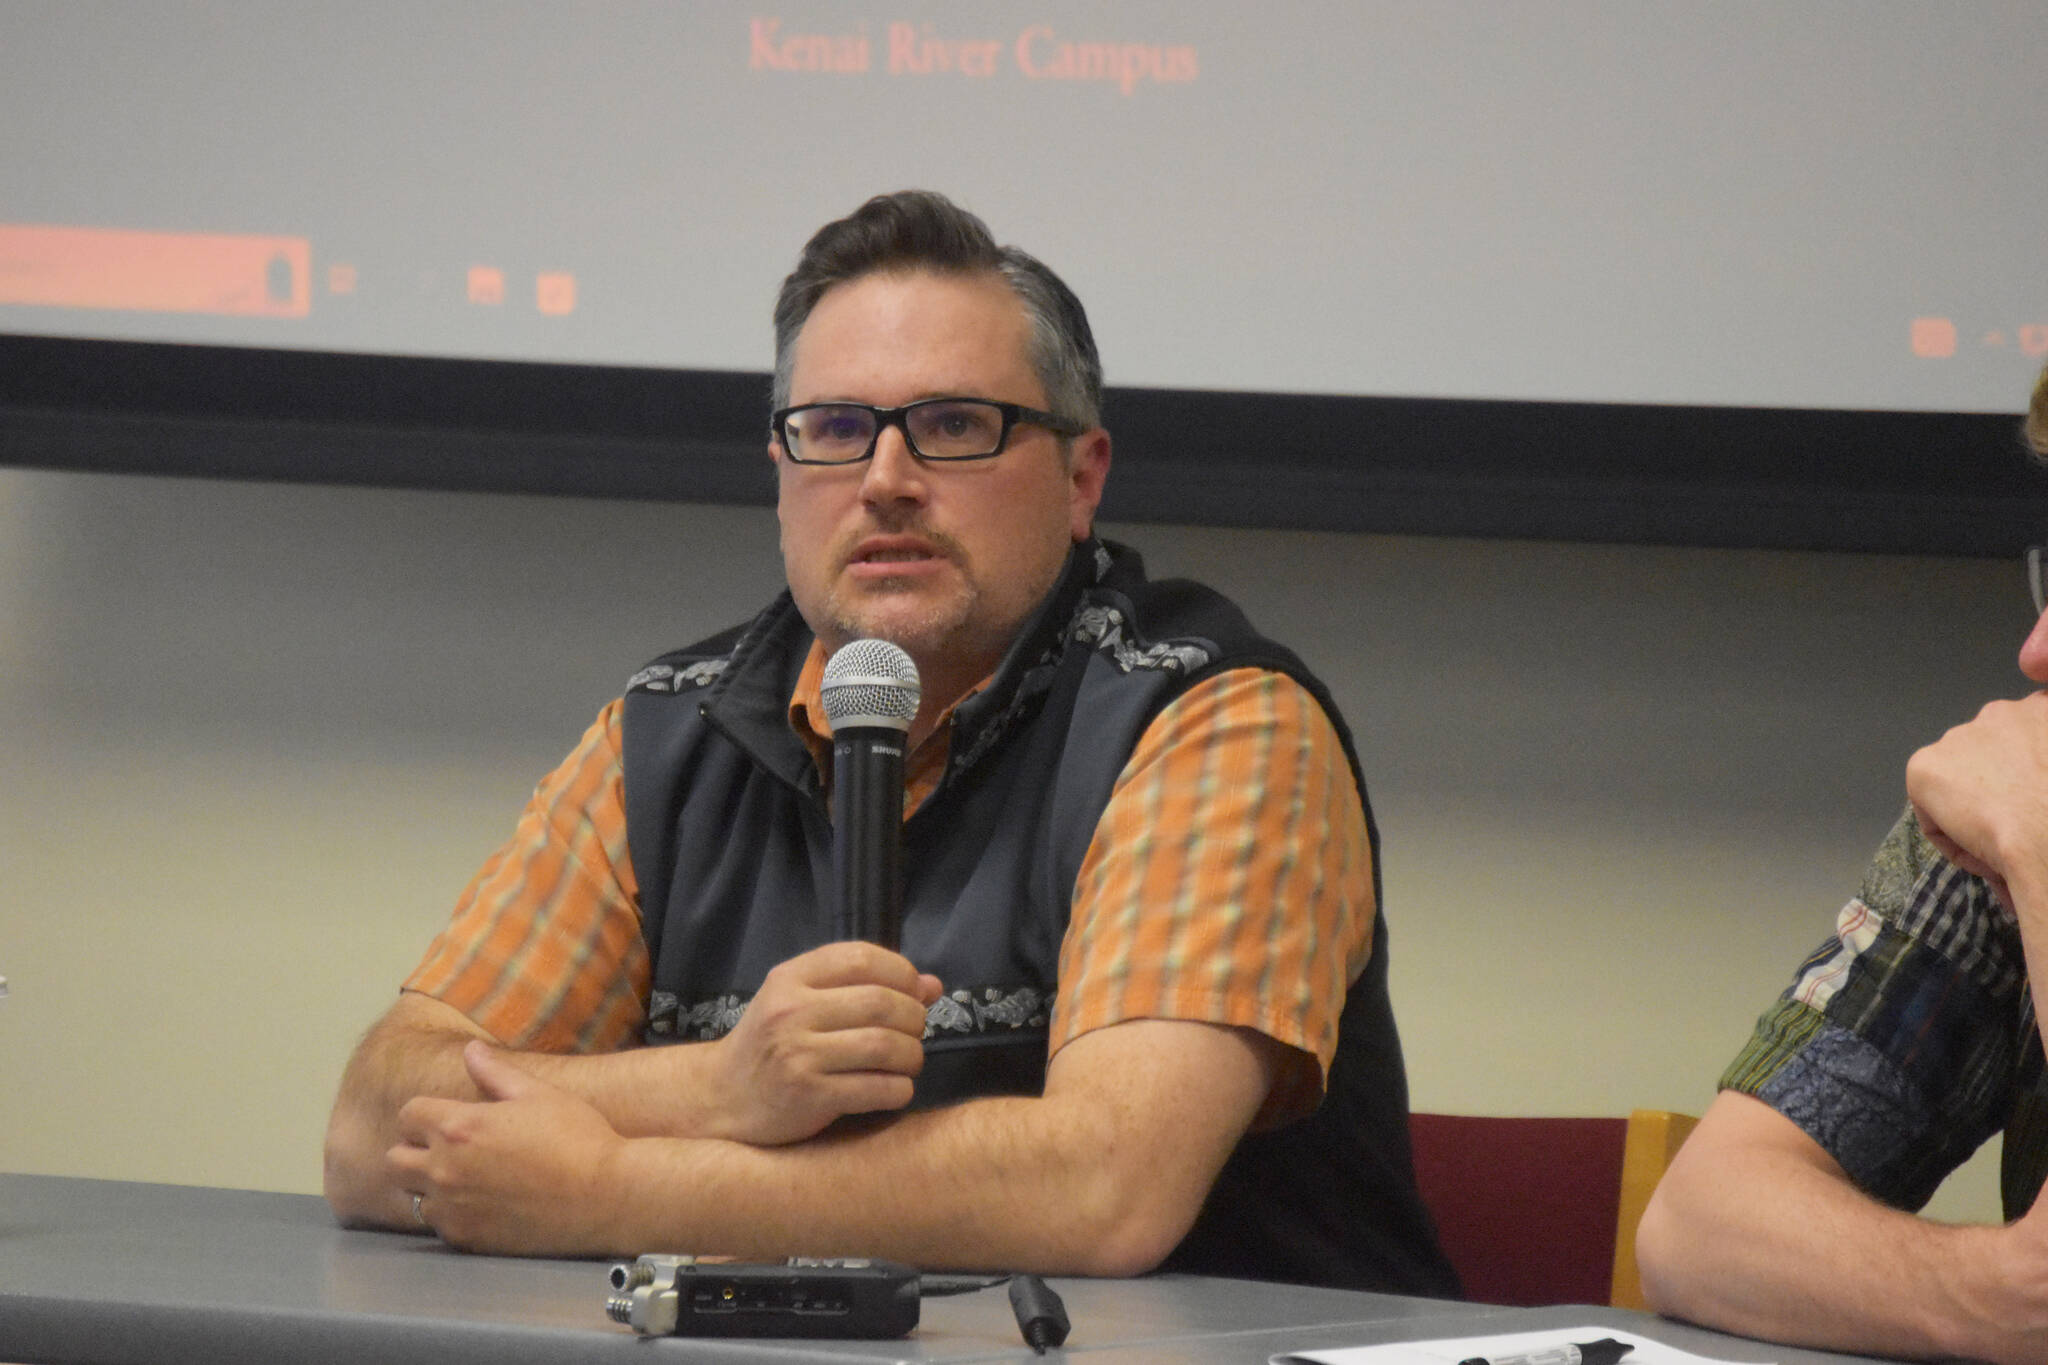 University of Alaska Fairbanks Associate Professor Dr. Peter Westley responds to a question during a panel discussion for the Kenai Peninsula College Showcase “State of the Salmon” on Wednesday, April 20, 2023, at KPC in Soldotna, Alaska. (Jake Dye/Peninsula Clarion)